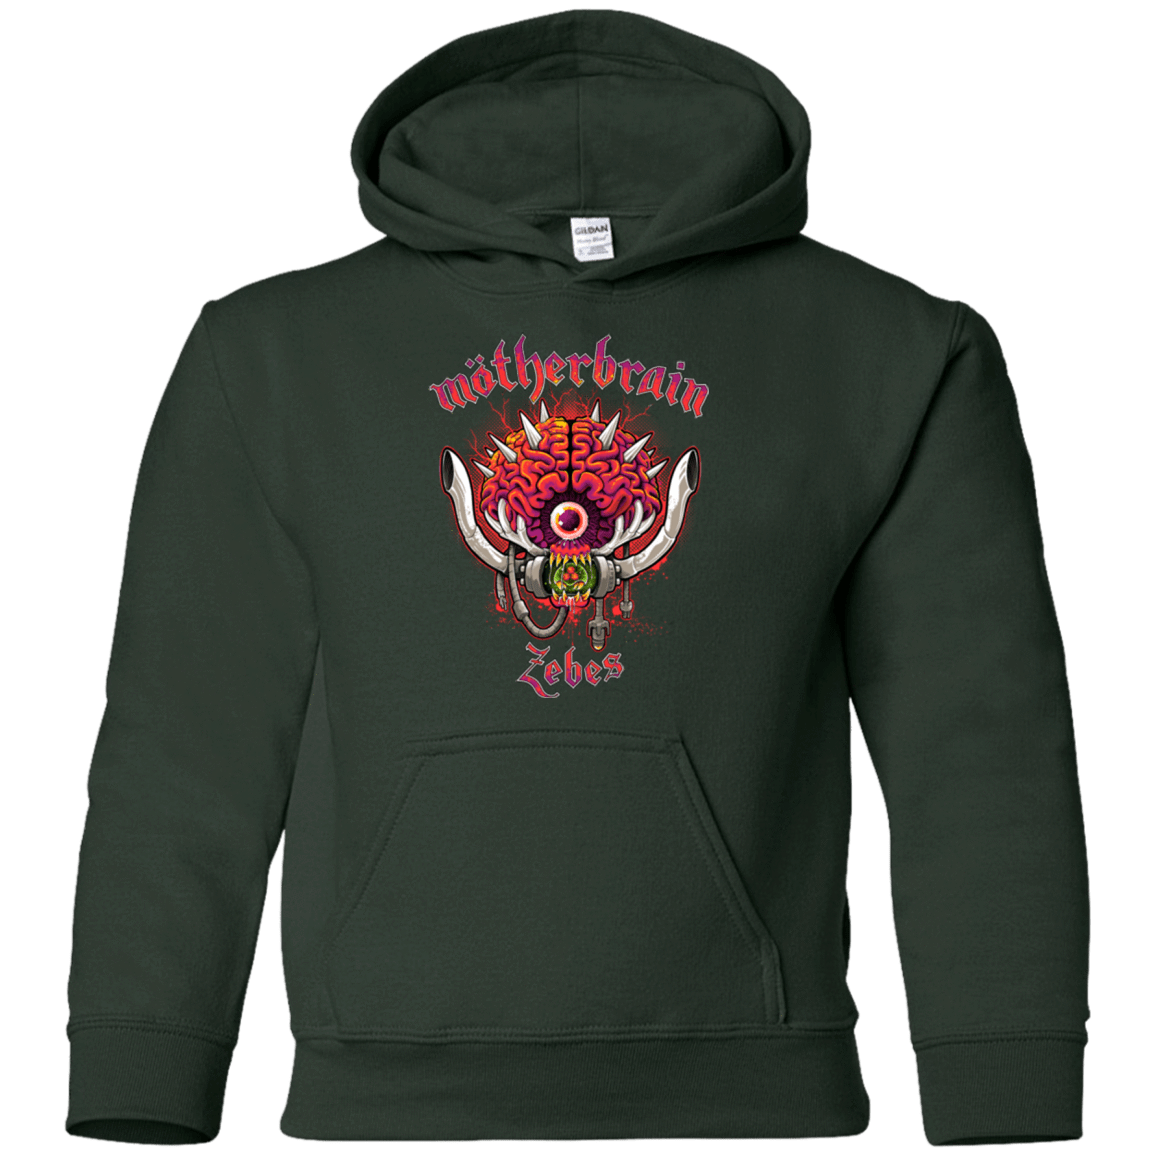 Sweatshirts Forest Green / YS Live From Zebes Youth Hoodie